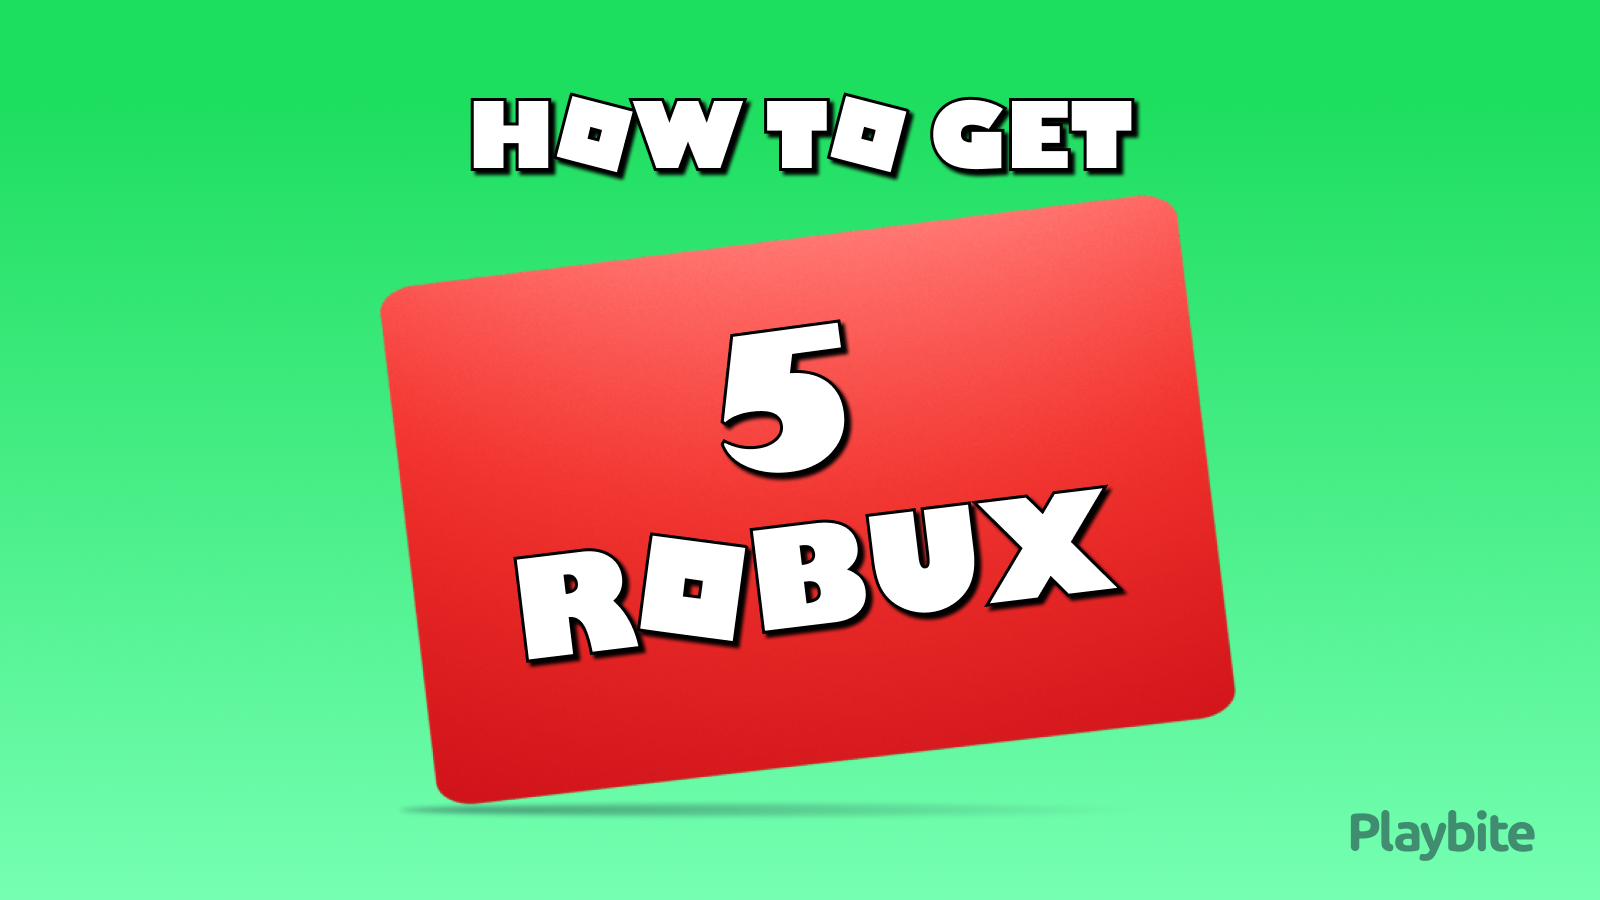 This Is How to Get Free Robux: It's Really Not What You're